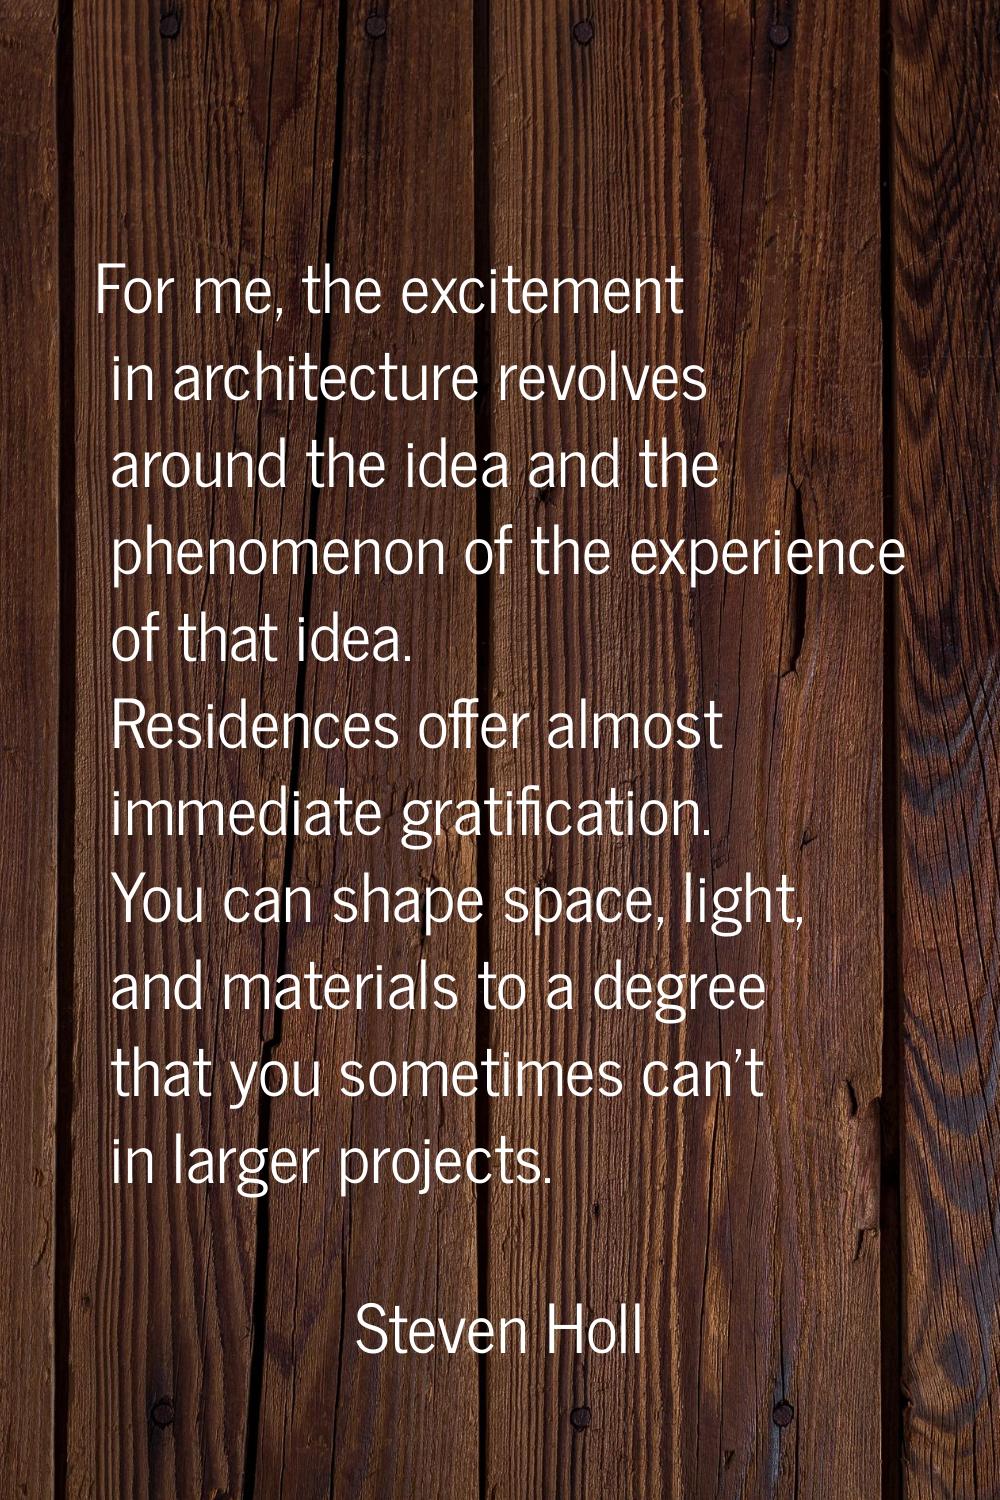 For me, the excitement in architecture revolves around the idea and the phenomenon of the experienc